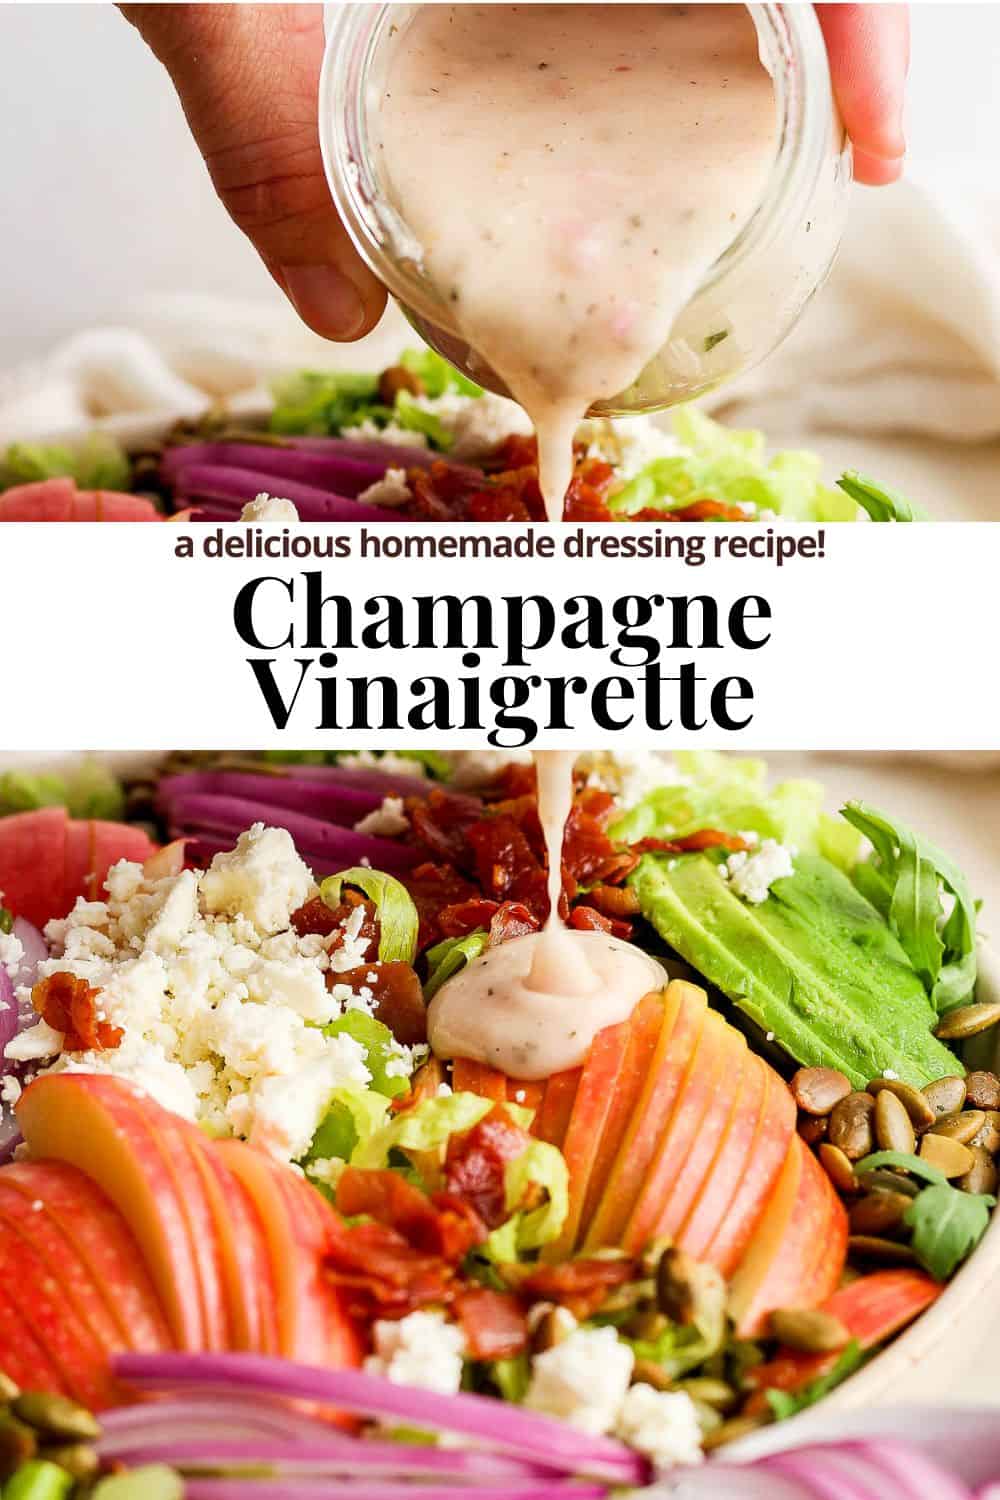 Pinterest image showing the dressing being poured on a salad with the title "champagne vinaigrette. a delcious homemade dressing recipe".